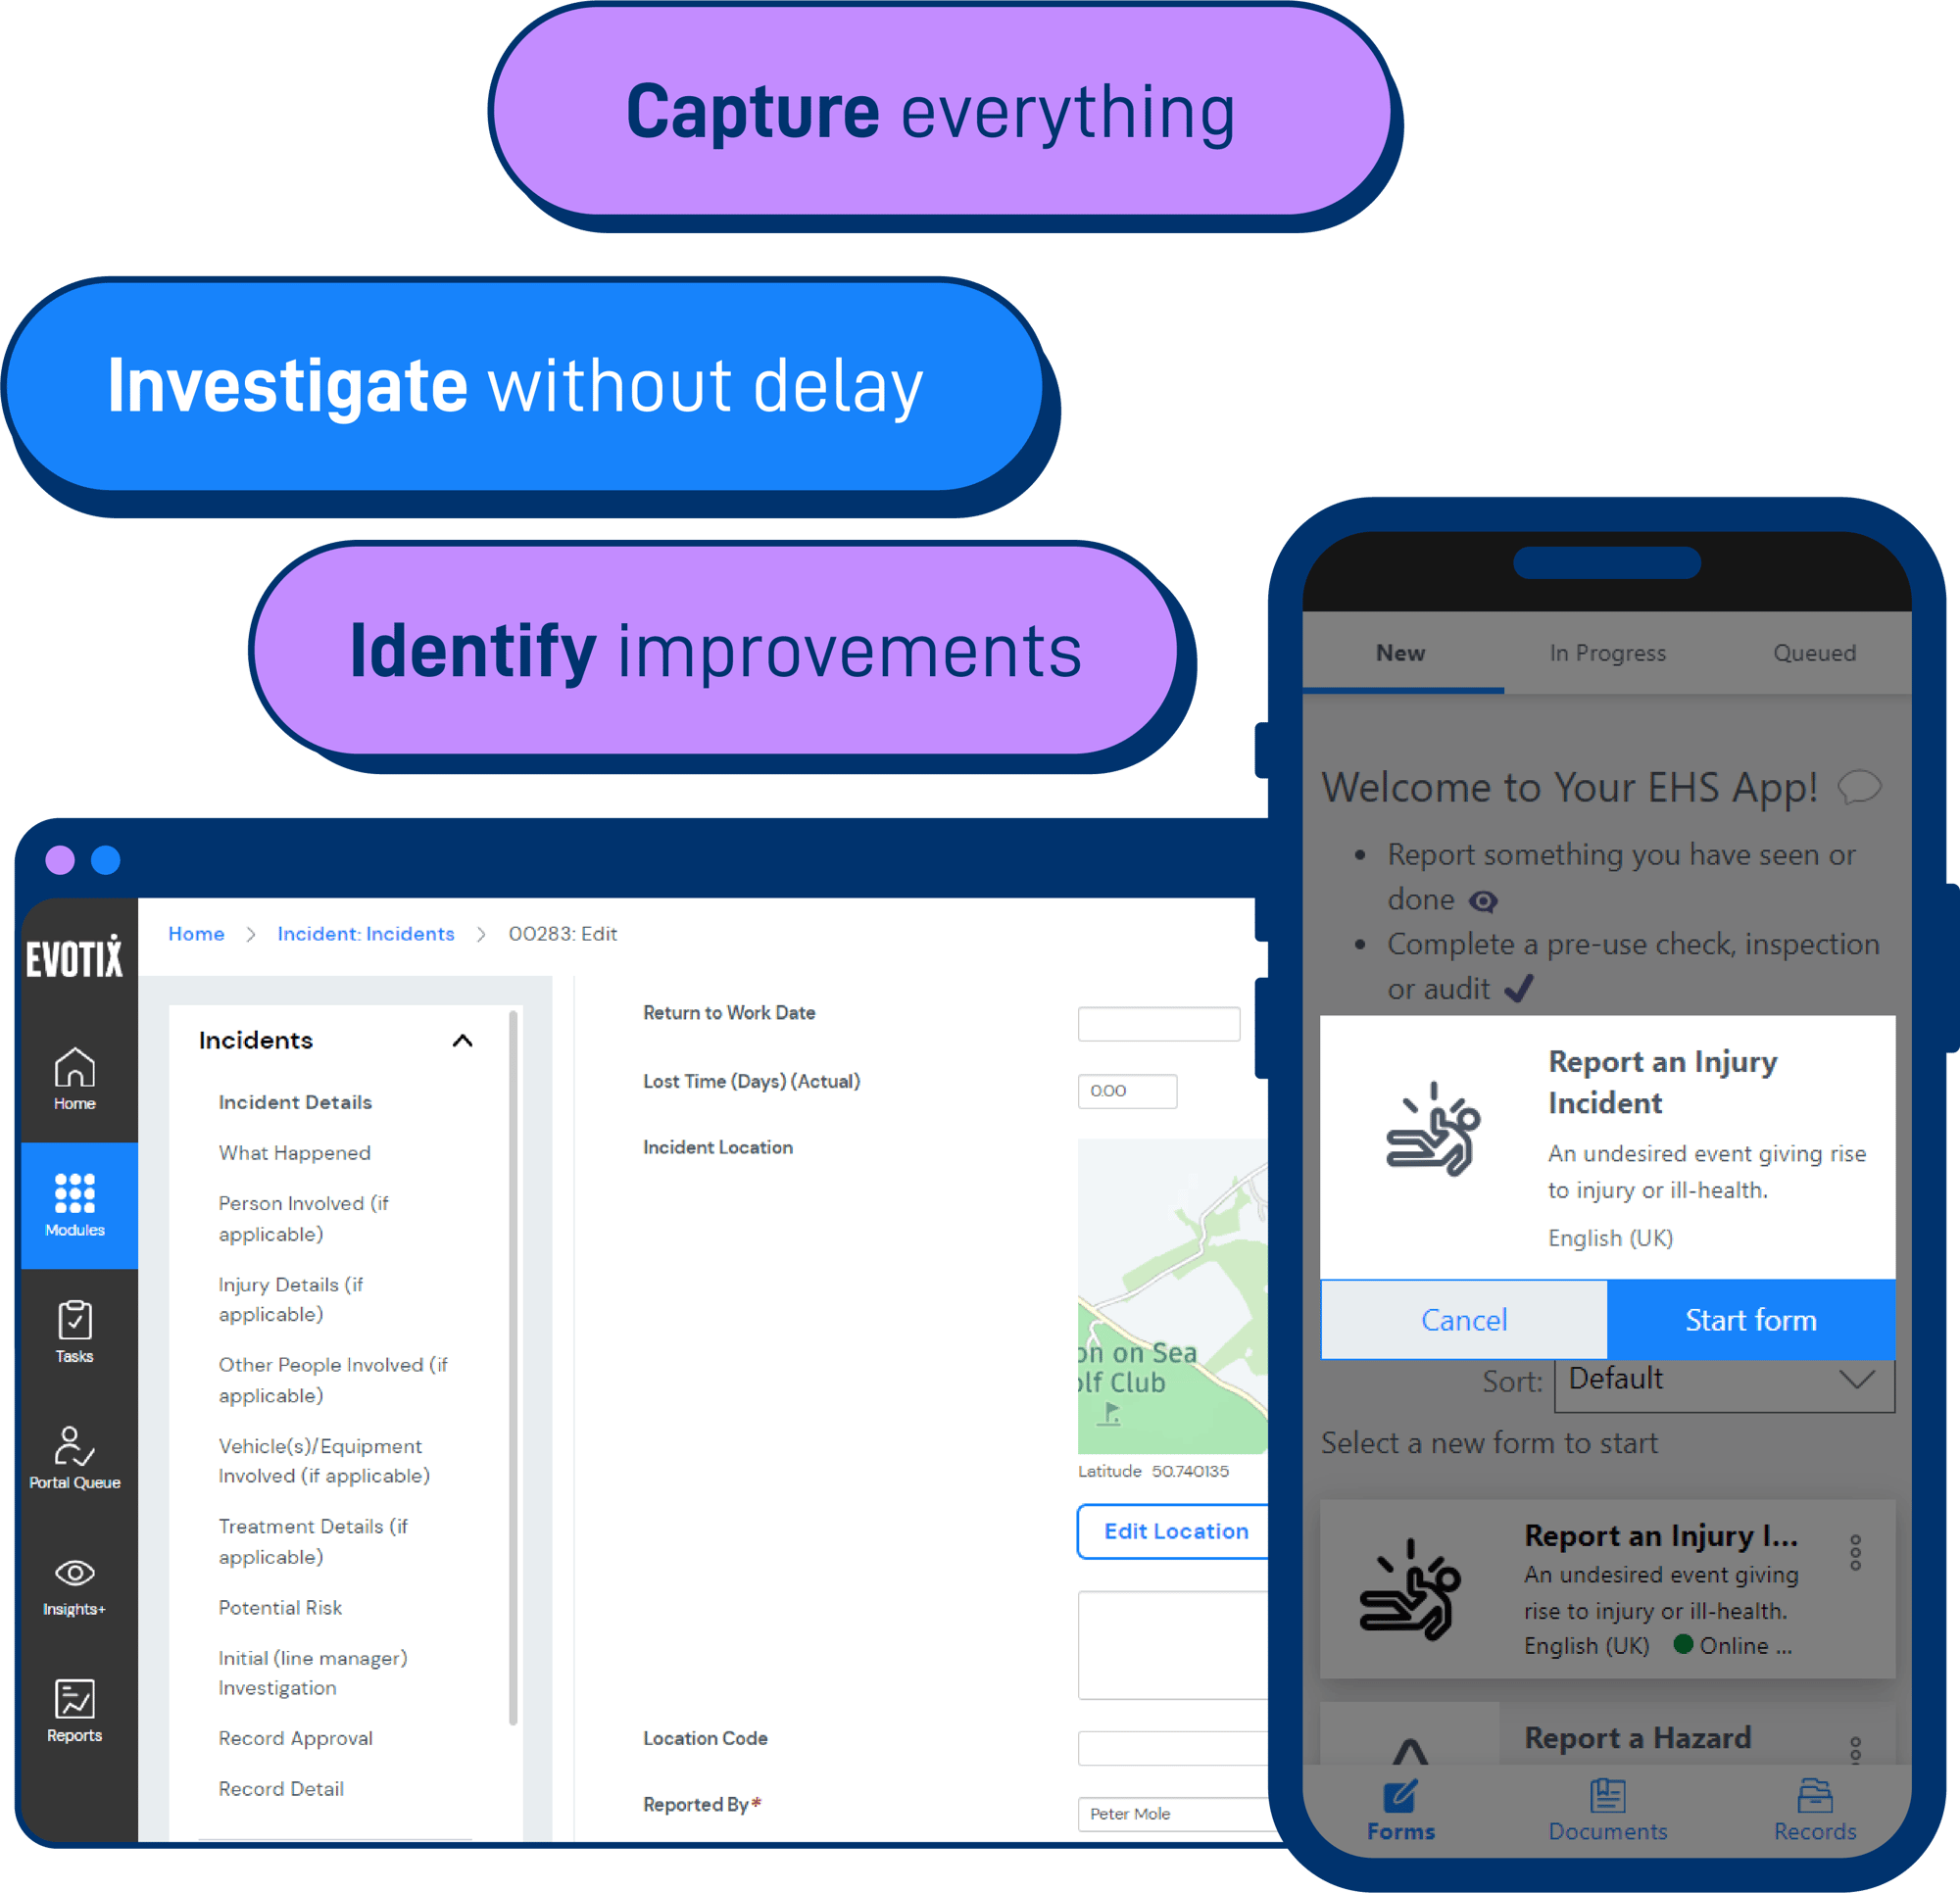 Incident page - Hero